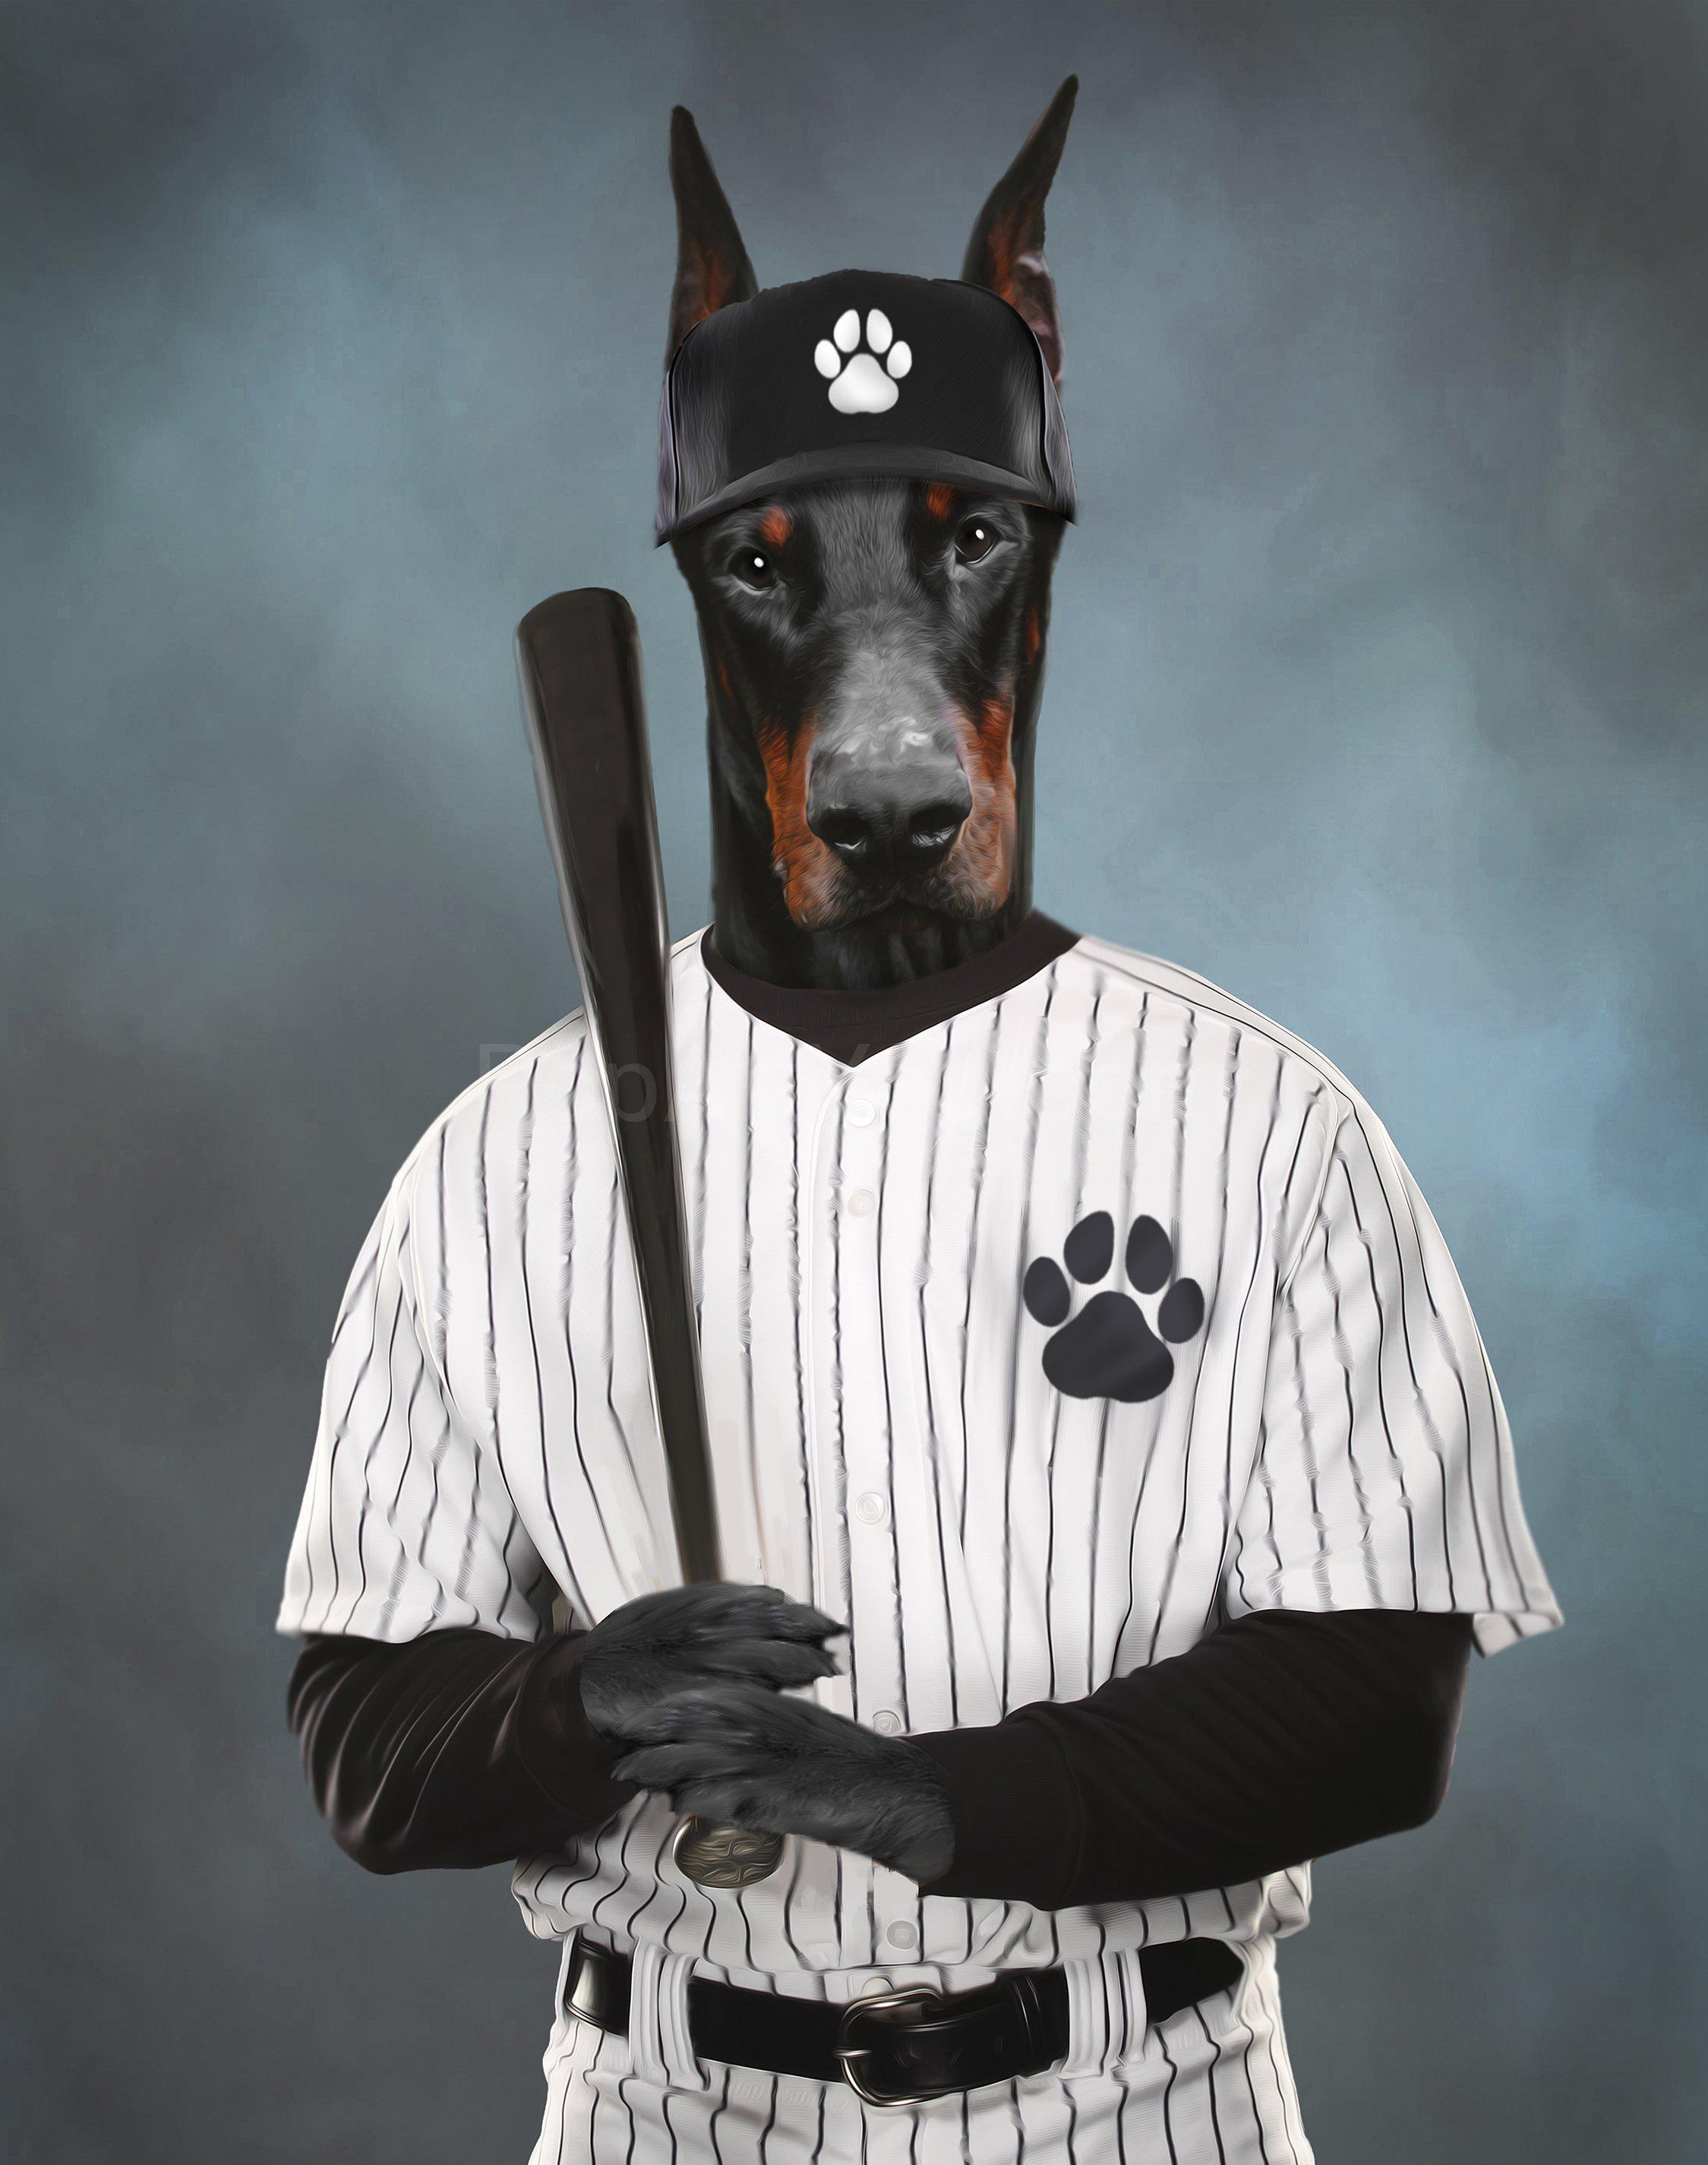 The portrait shows a dog with a human body wearing white baseball clothes with a black bat